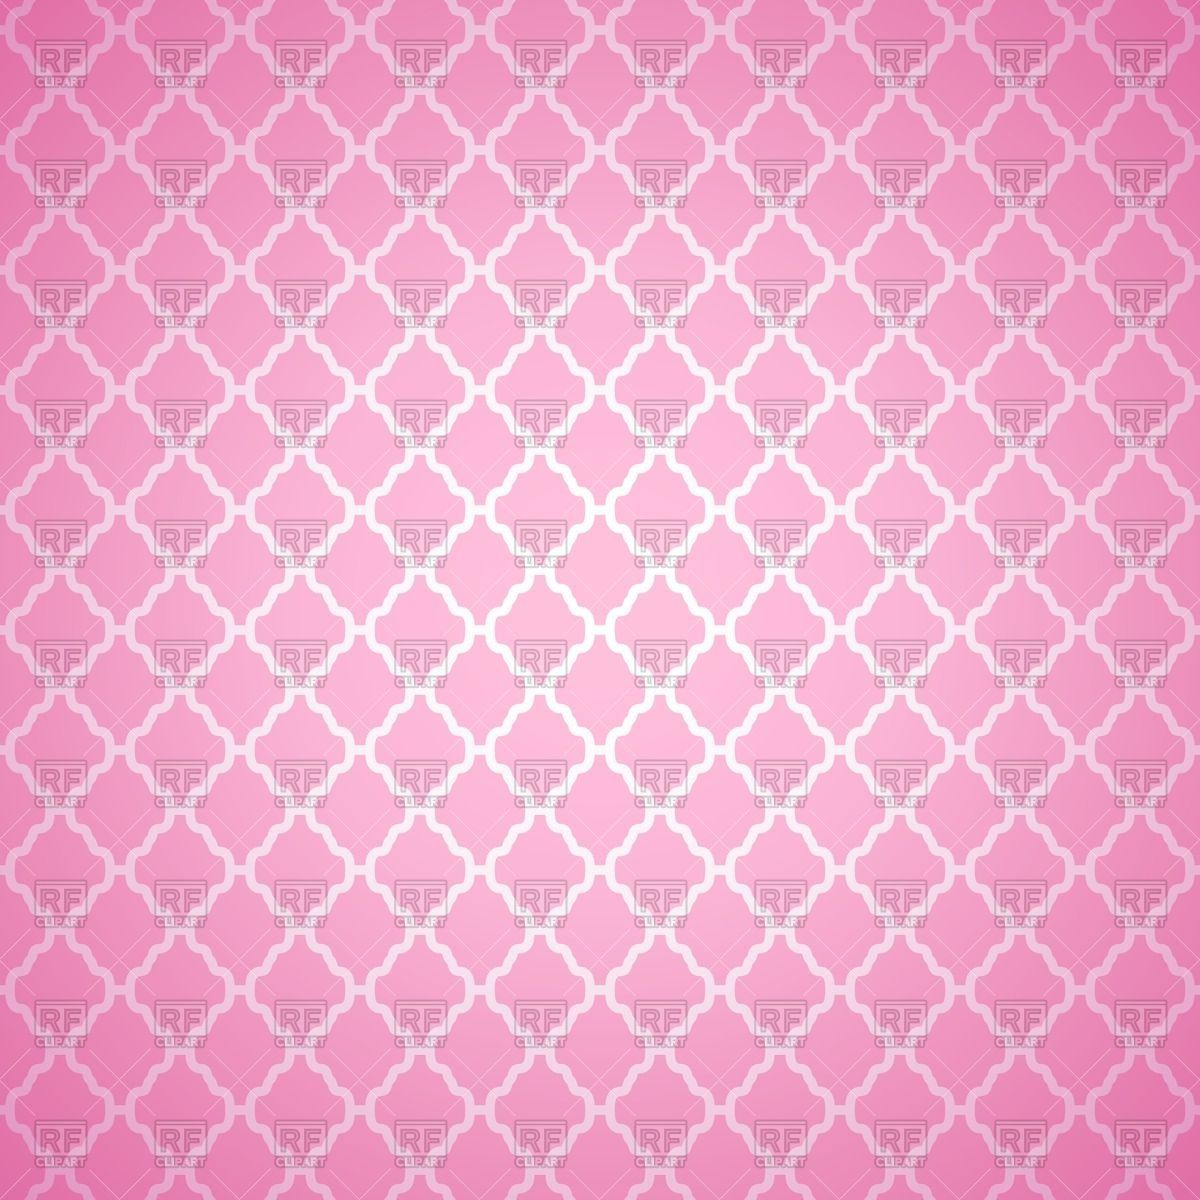 Free download Pink retro wallpaper with mesh Background Textures